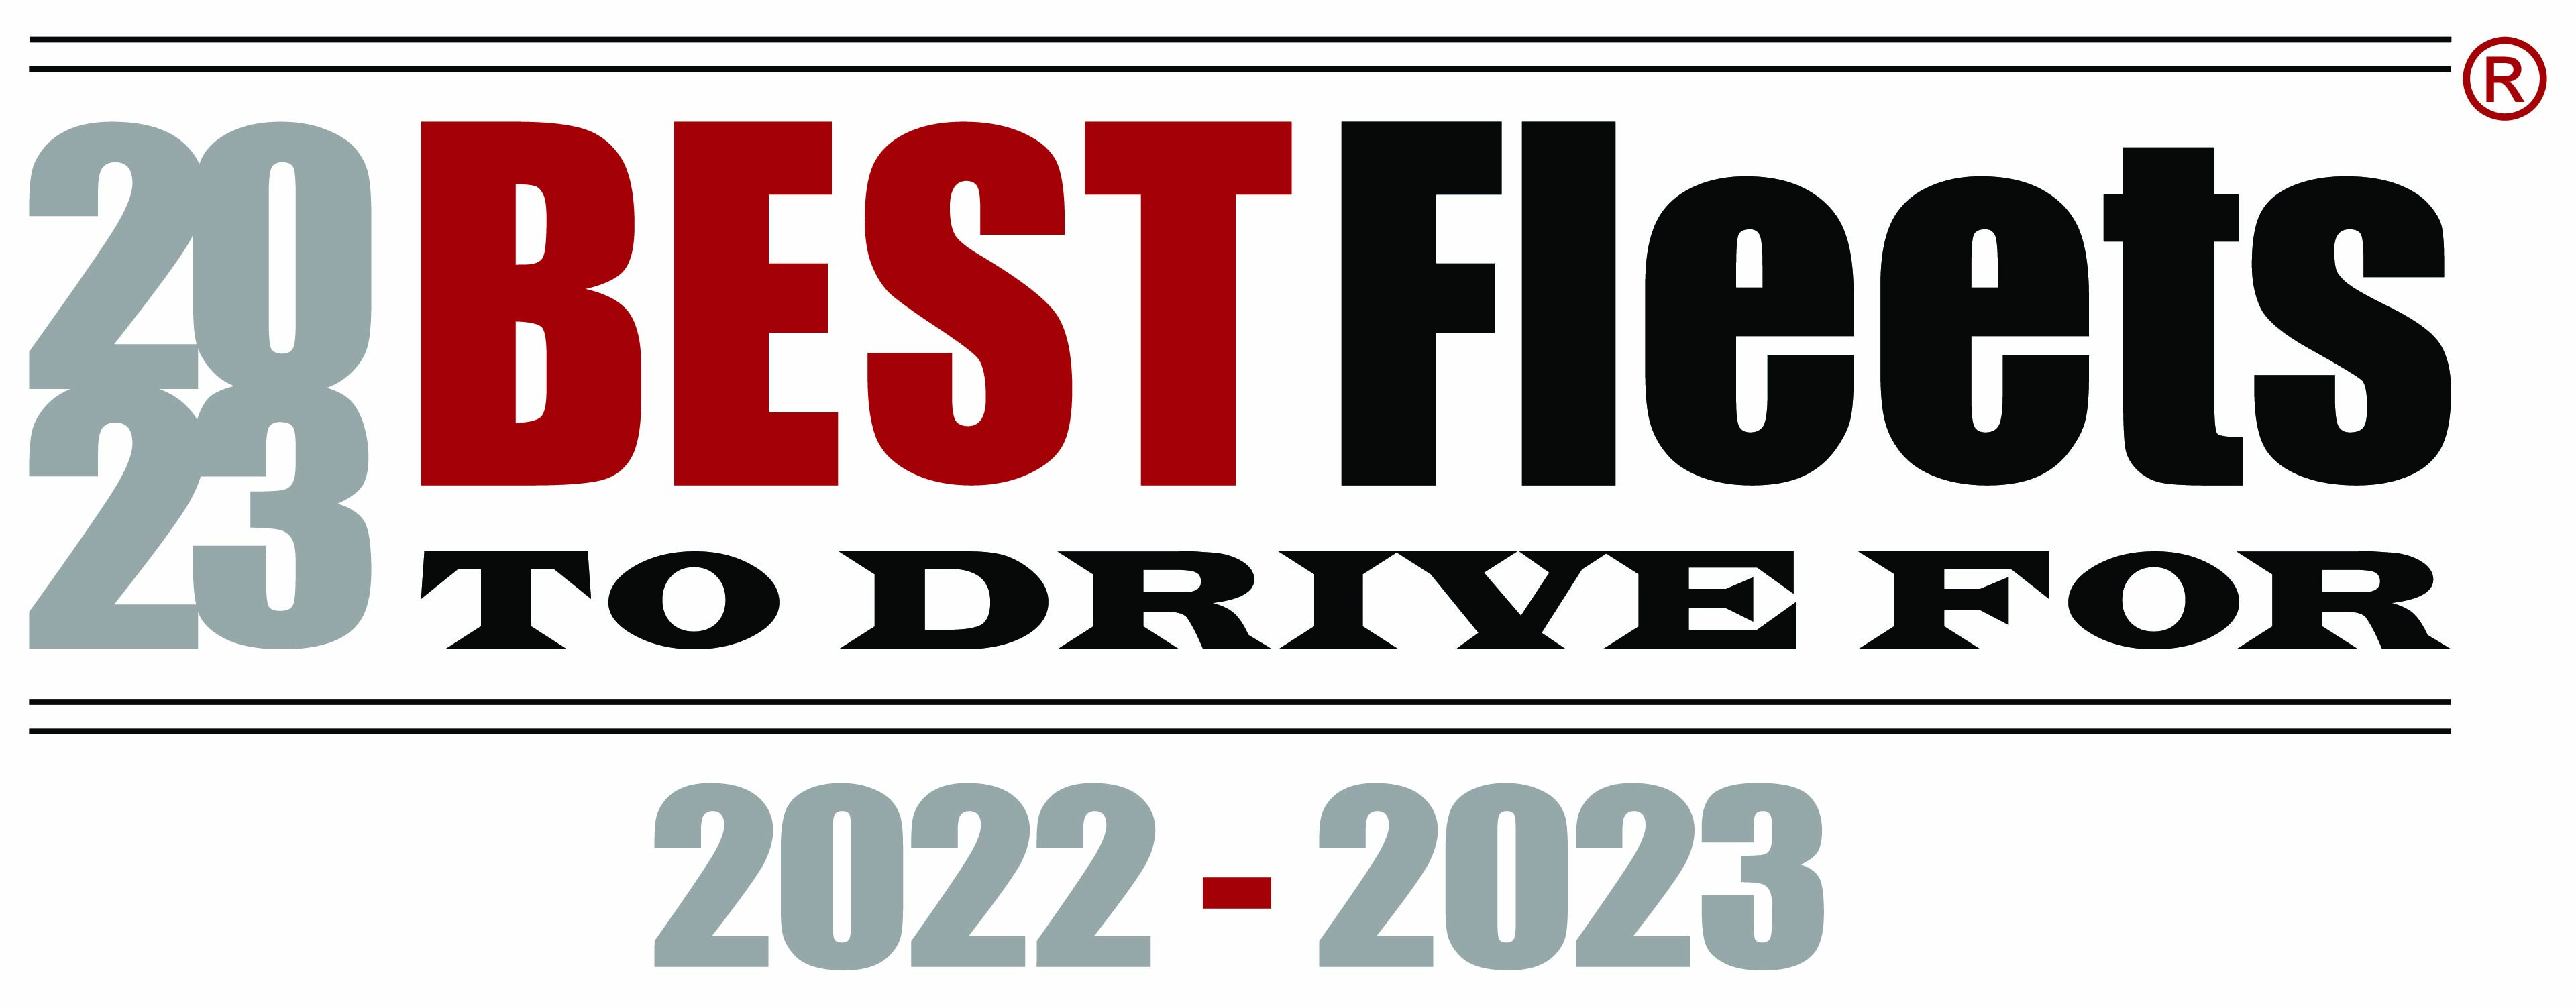 2018 Best Fleets to Drive For